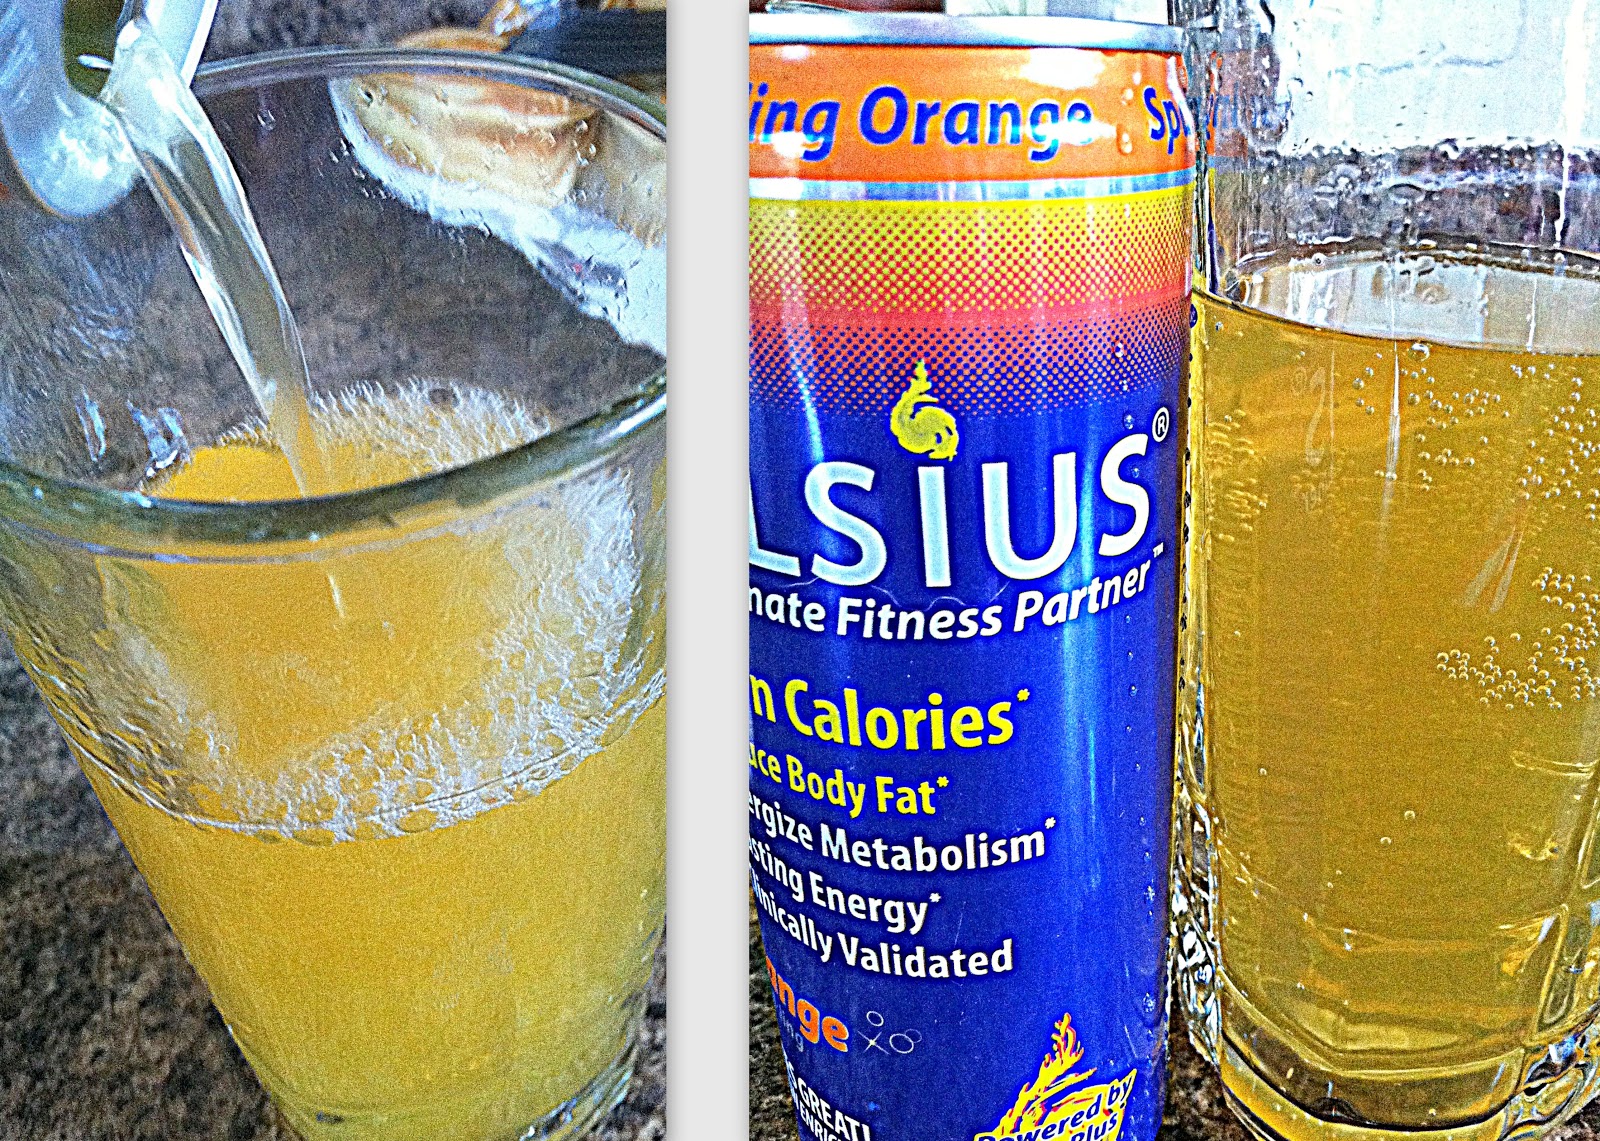 Lifes Perception And Inspiration Celsius Energy Drink Review